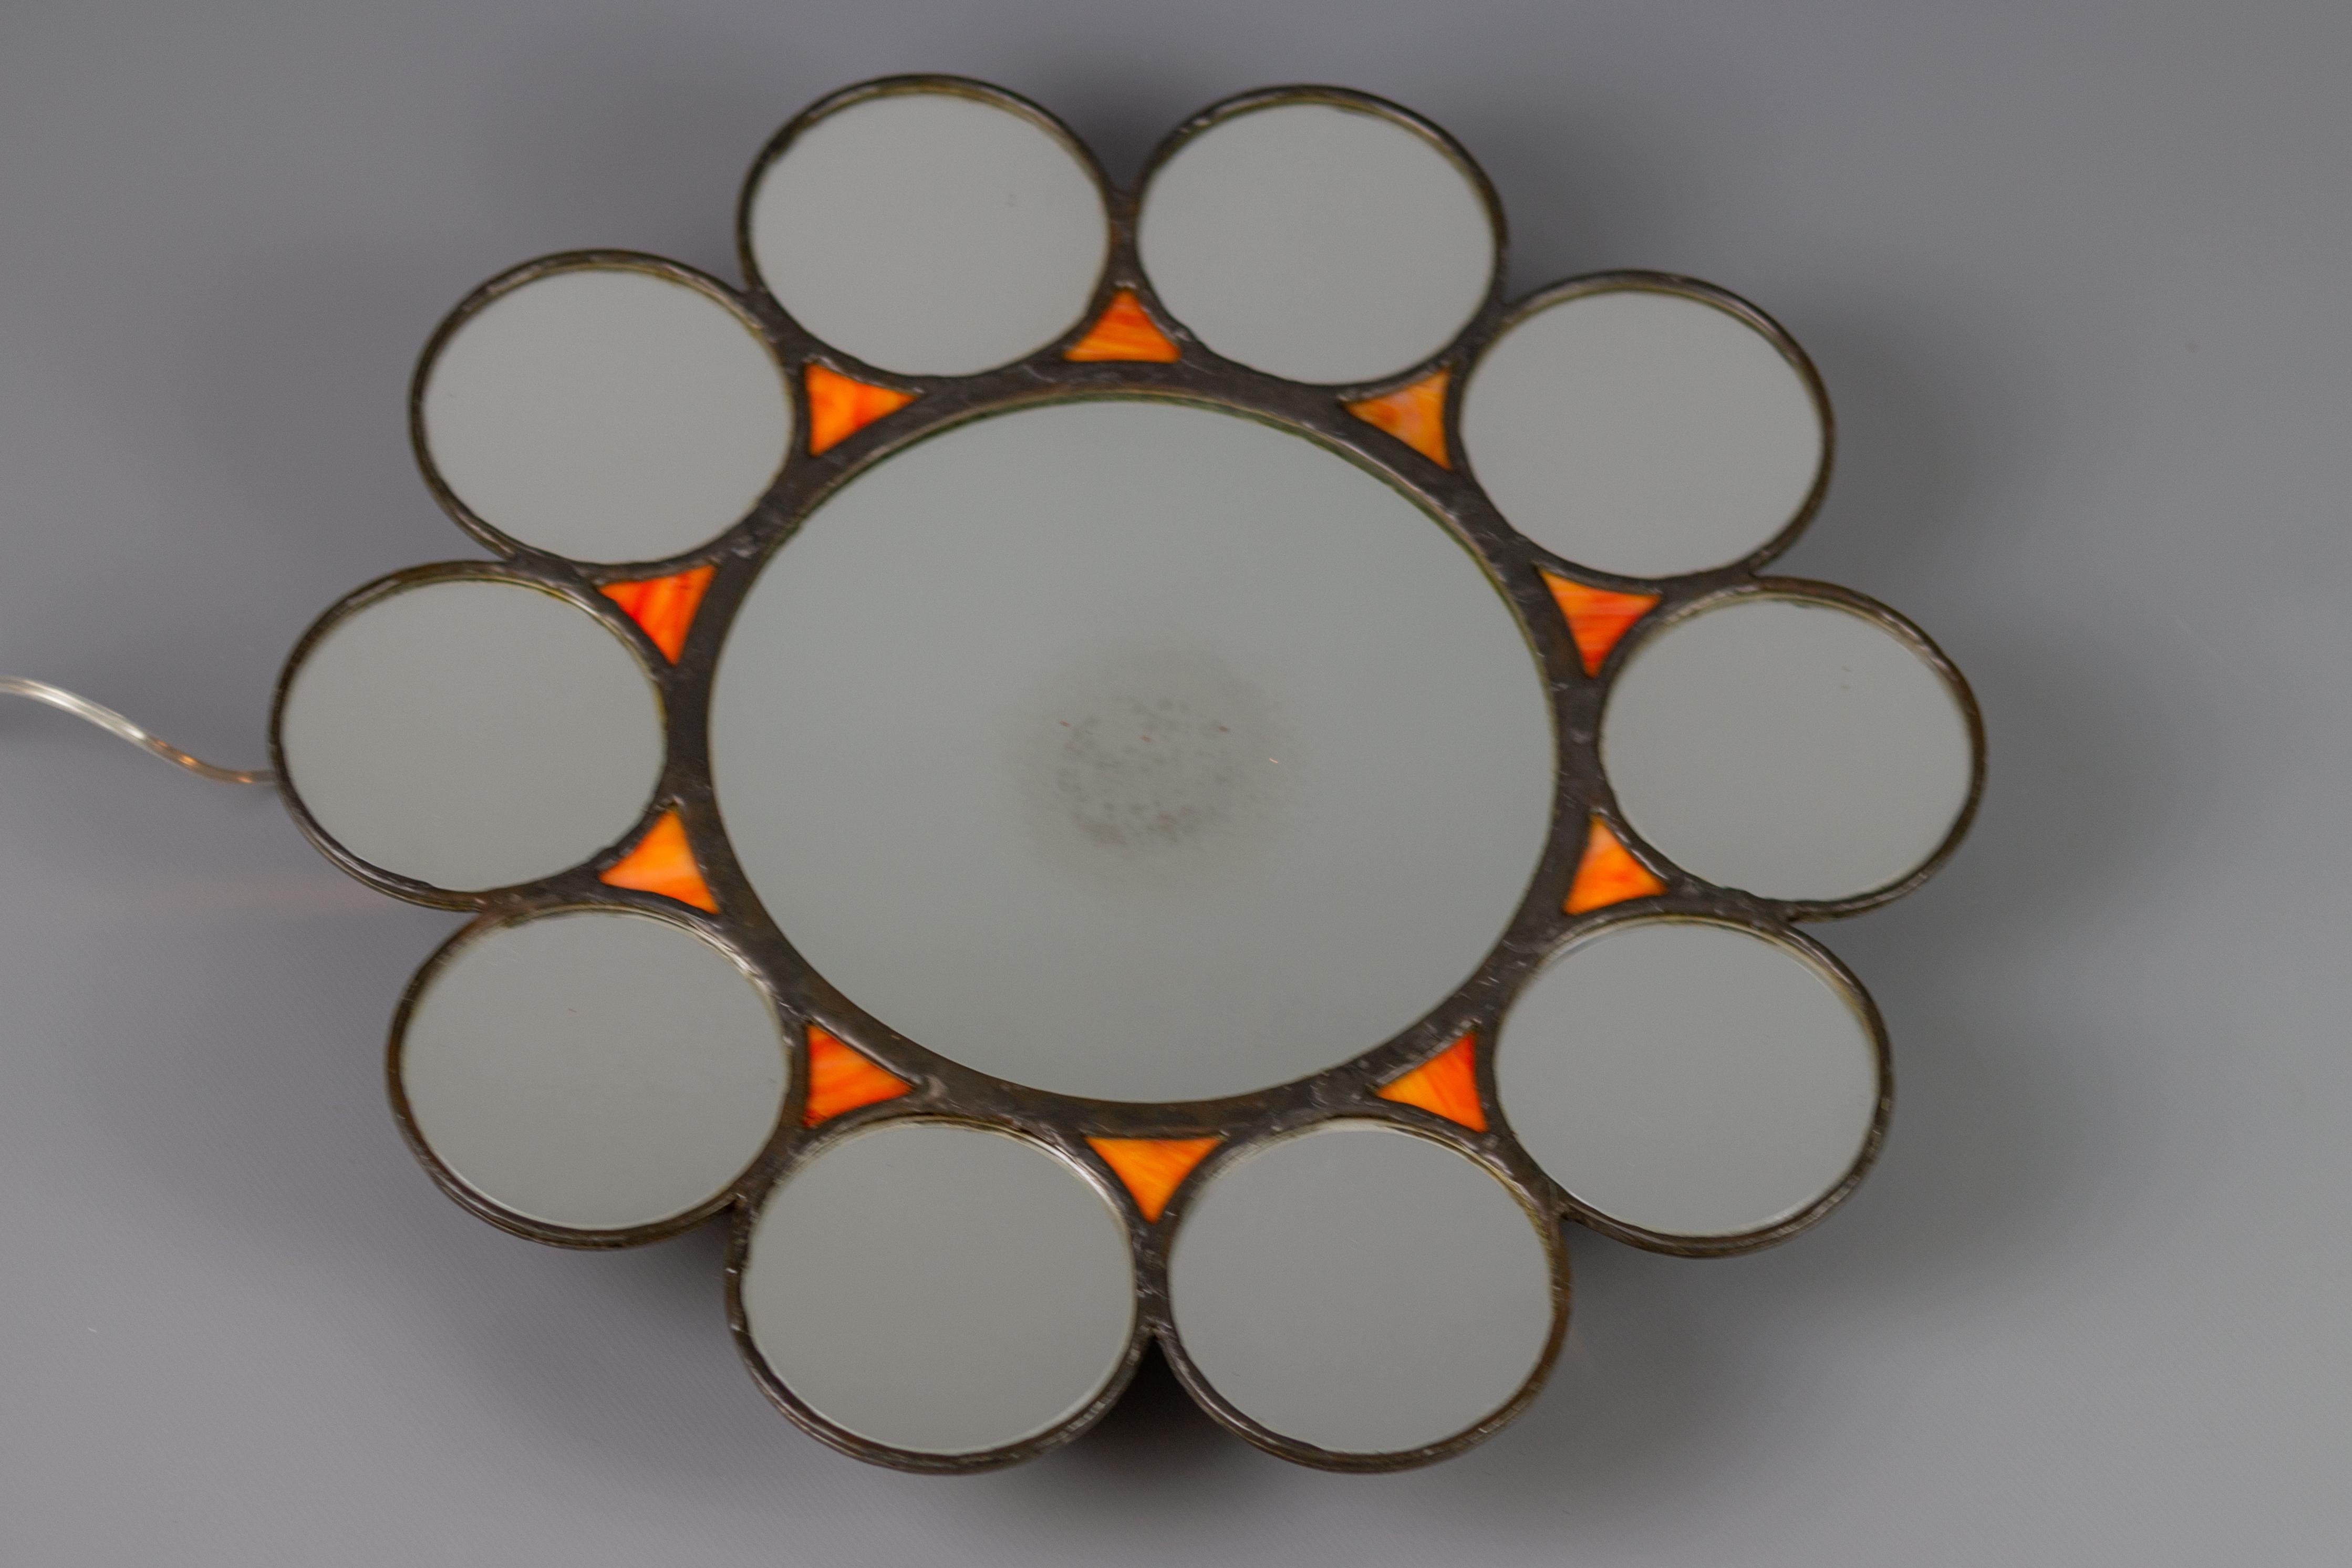 Sun-shaped Mid-Century Modern backlit metal and orange glass wall mirror from the circa 1960s.
Very unusual and rare Mid-Century Modern or Industrial style illuminated backlit wall mirror. This beautiful round wall mirror features a bigger, round